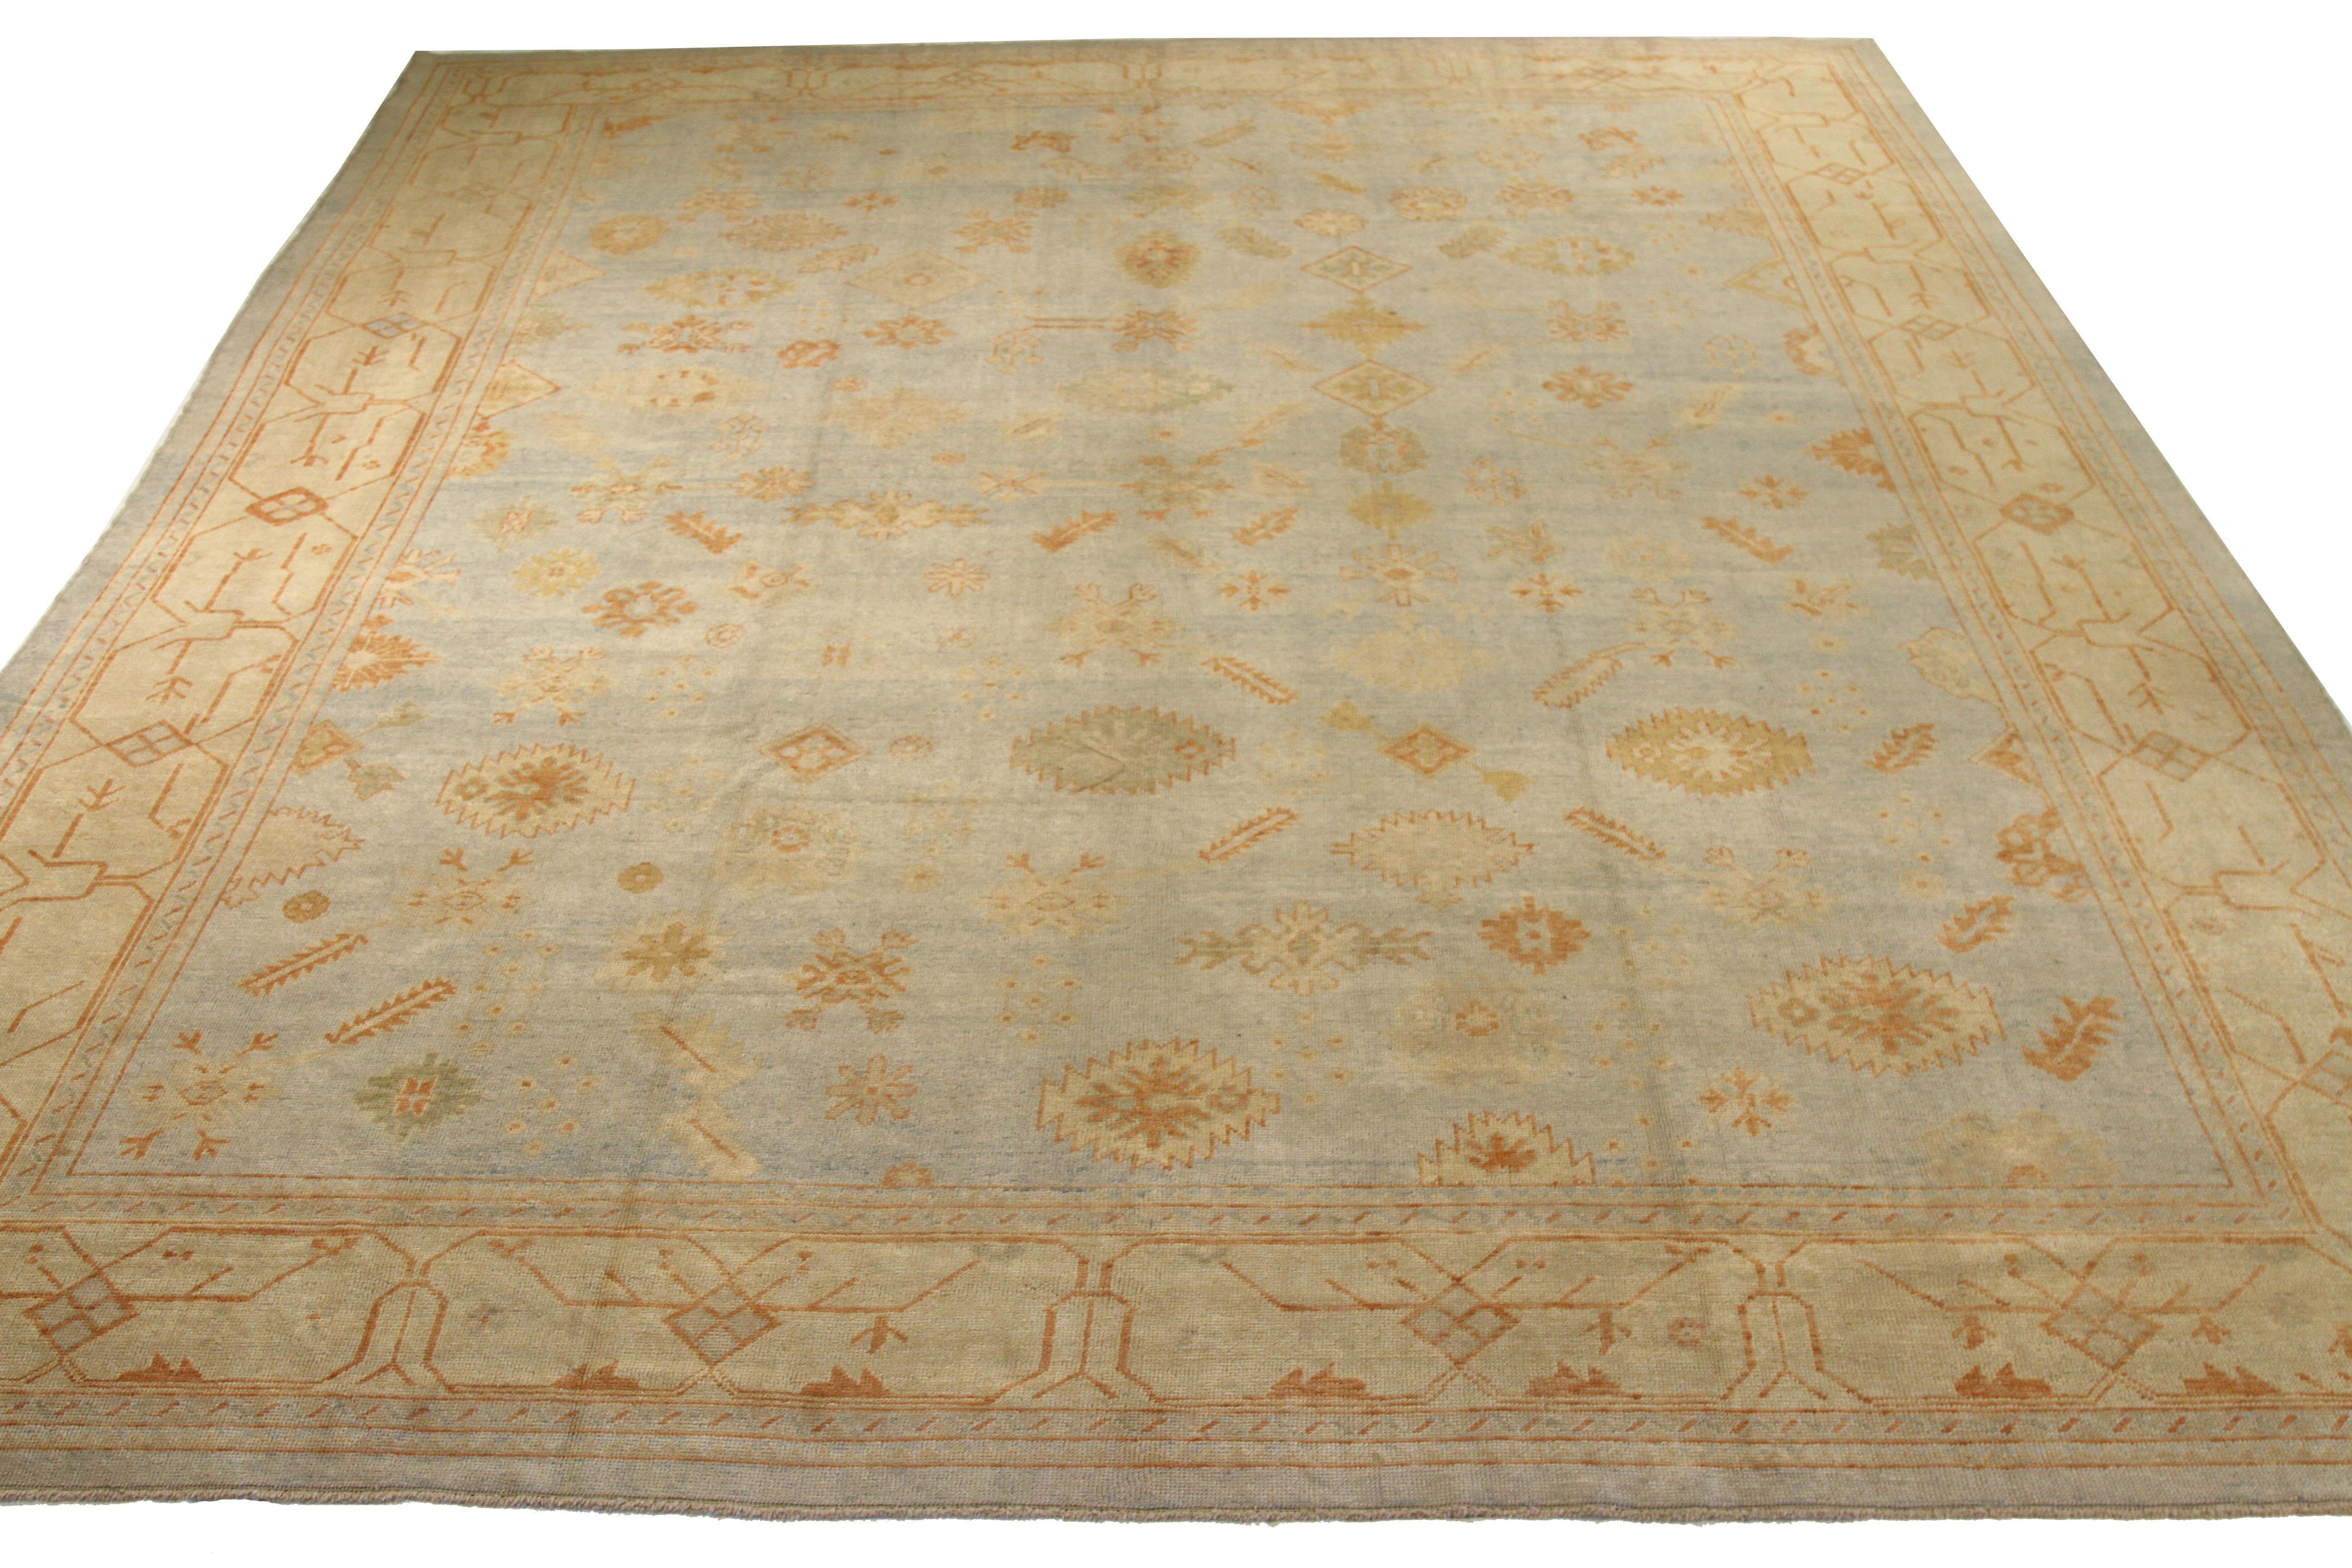 Modern 21st century hand-woven Turkish area rug made from fine wool and all-natural vegetable dyes that are safe for people and pets. This beautiful piece features a rich field of floral details in various colors which is the traditional weaving